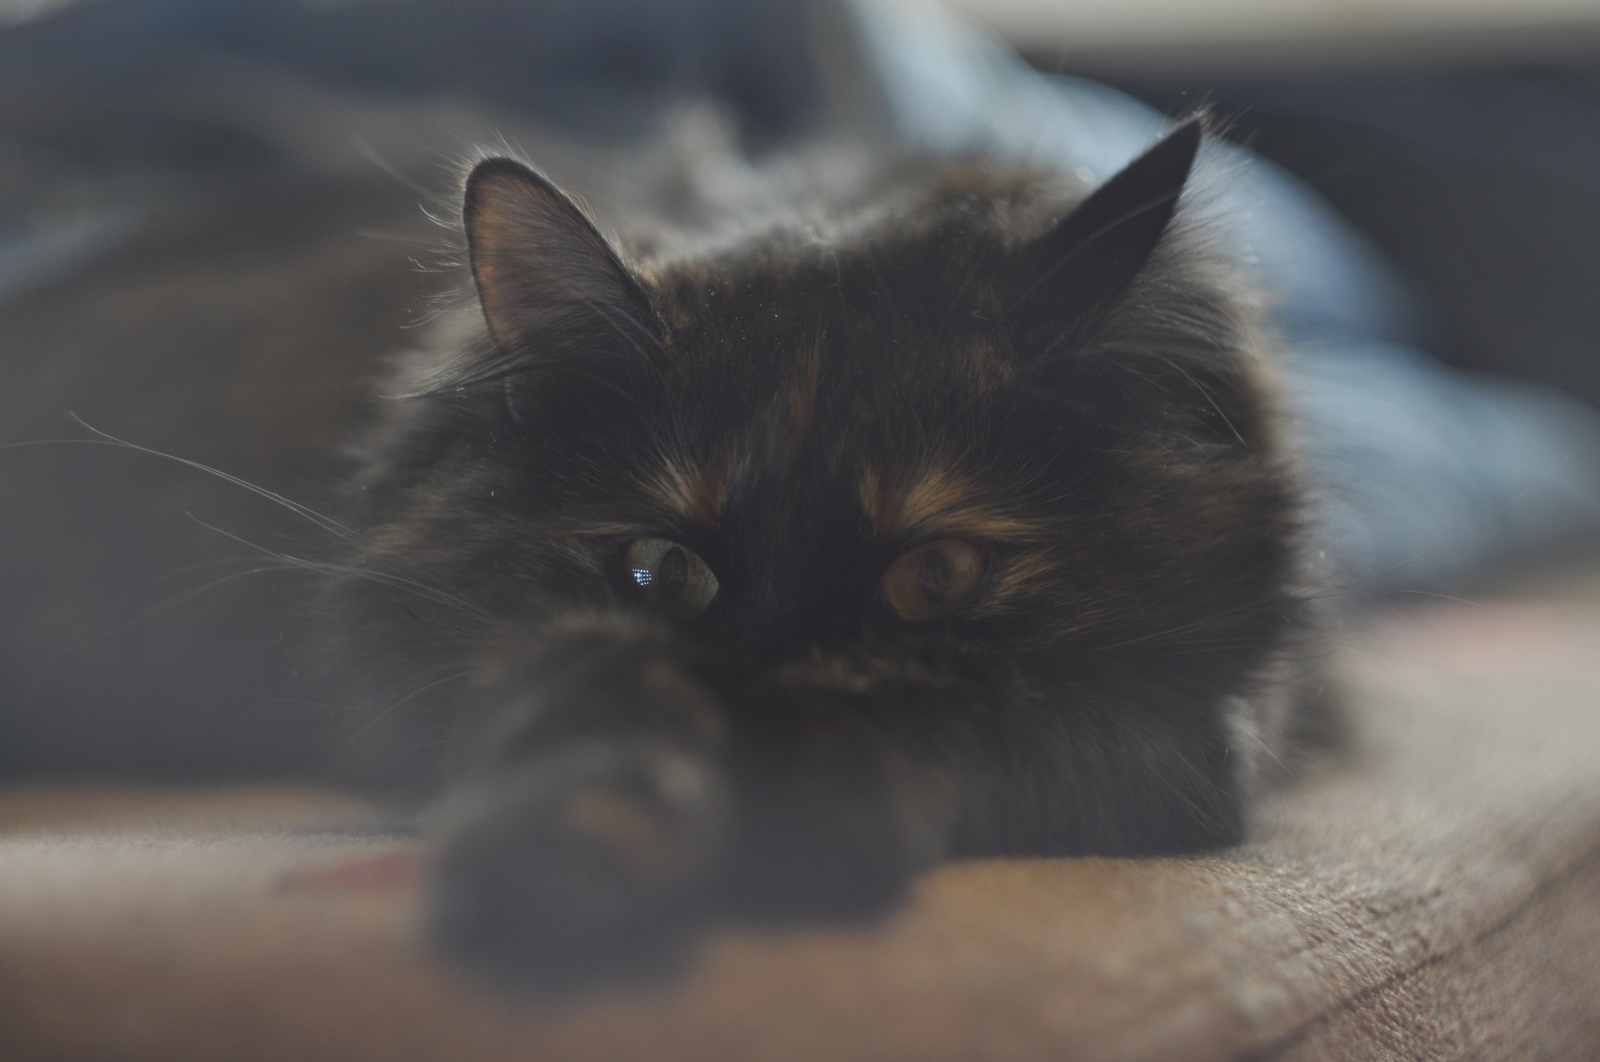 Attempt at writing - Longpost, cat, Helios 44m, I want criticism, Beginning photographer, Tricolor cat, Nikkor 50mm, Helios 44m